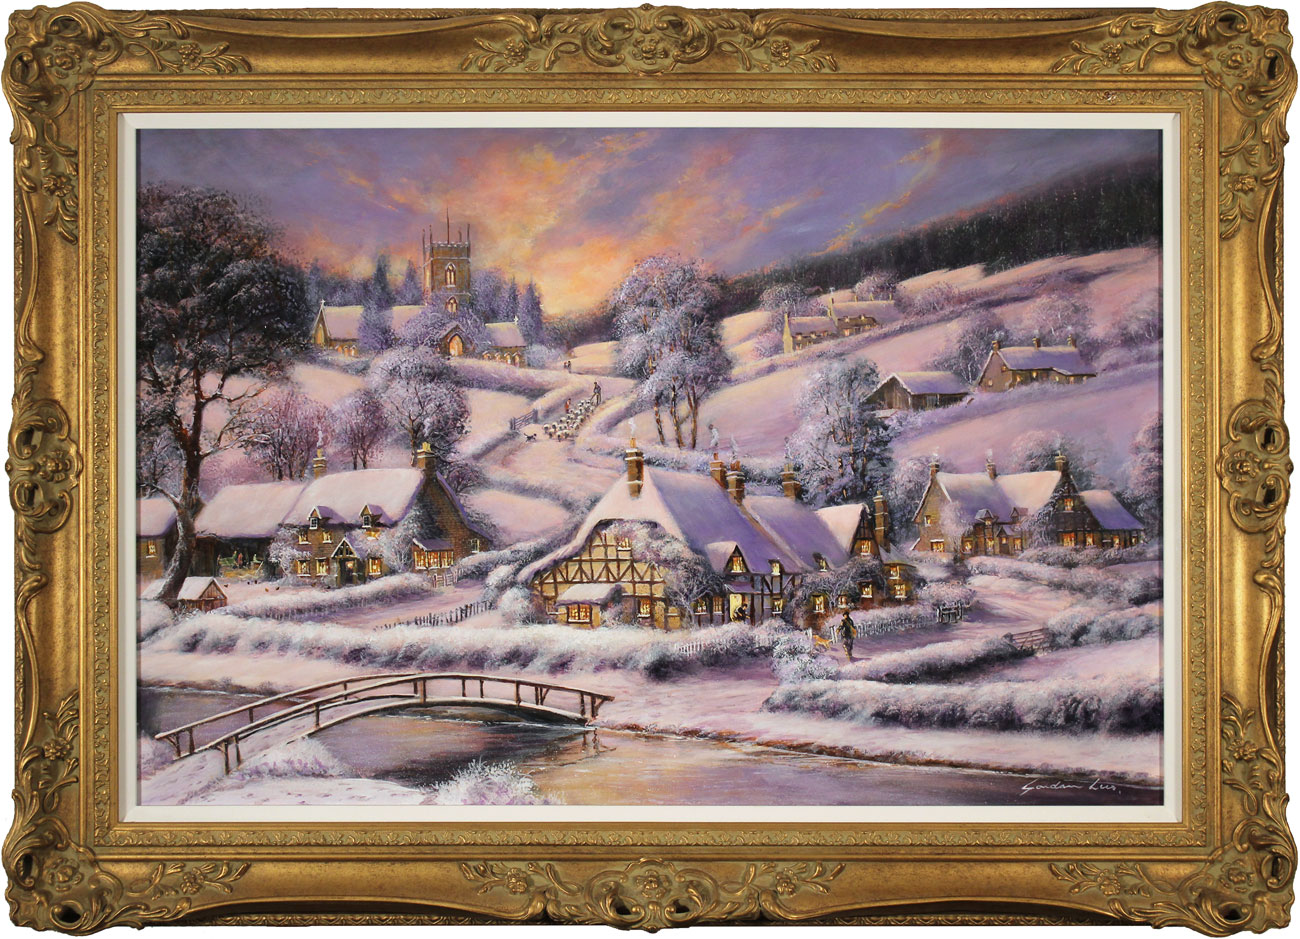 Gordon Lees, Original oil painting on panel, A Winter's Eve, click to enlarge